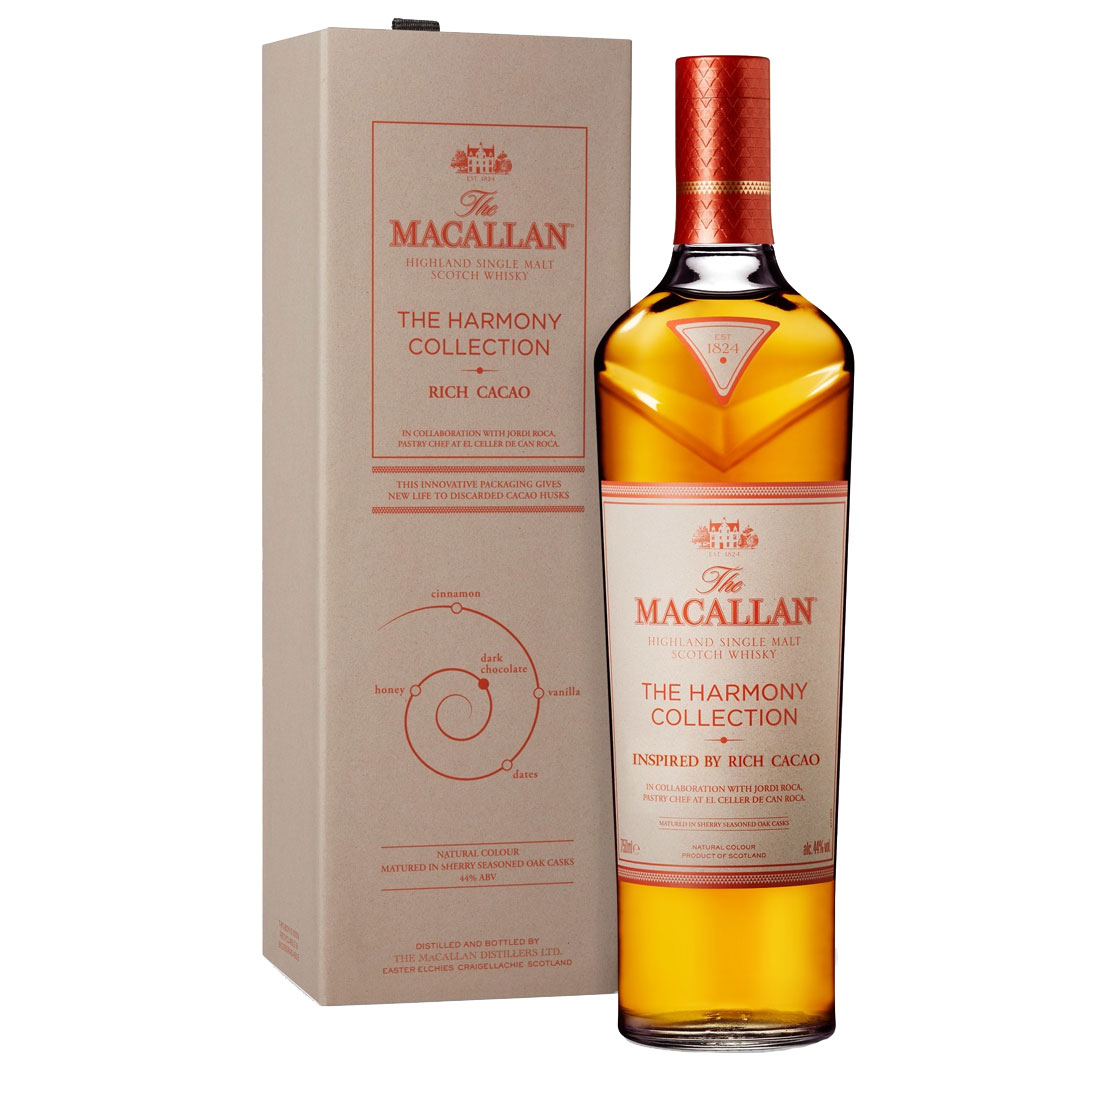 LB_Bottle_The-Macallan-The-Harmony-Collection